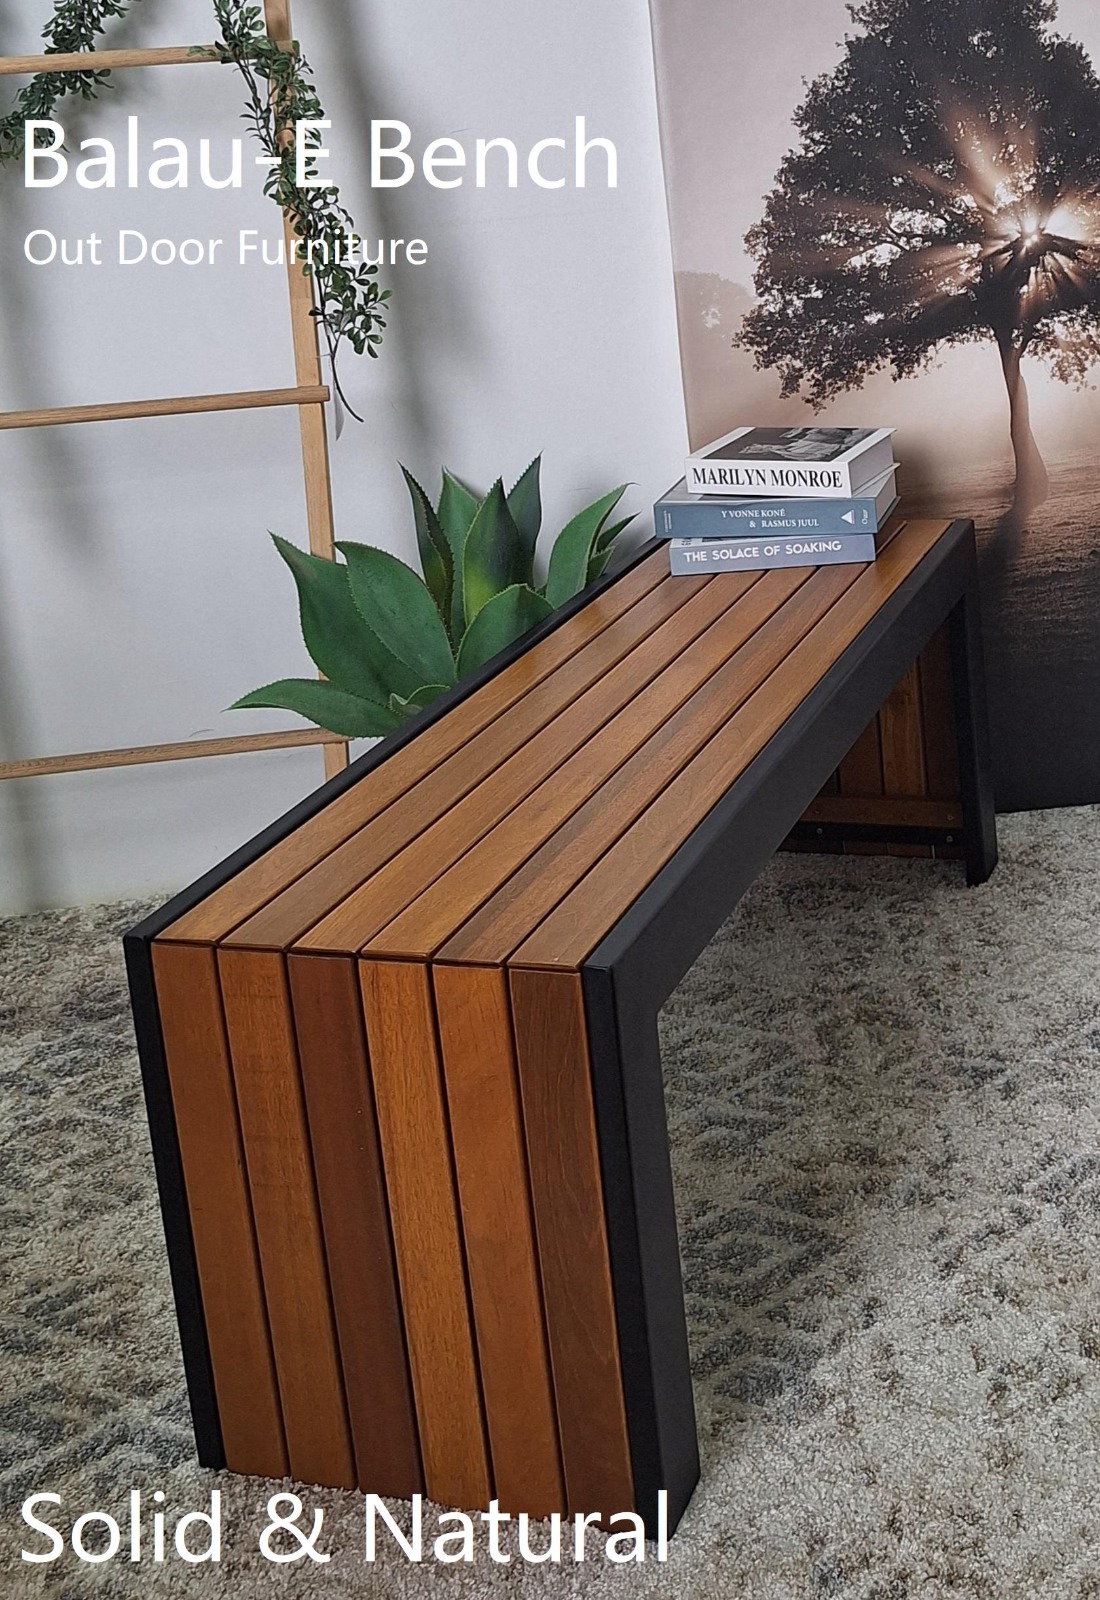 Where to Buy Wooden Benches in Malaysia: Decon Designs - A Legacy of Quality and Craftsmanship